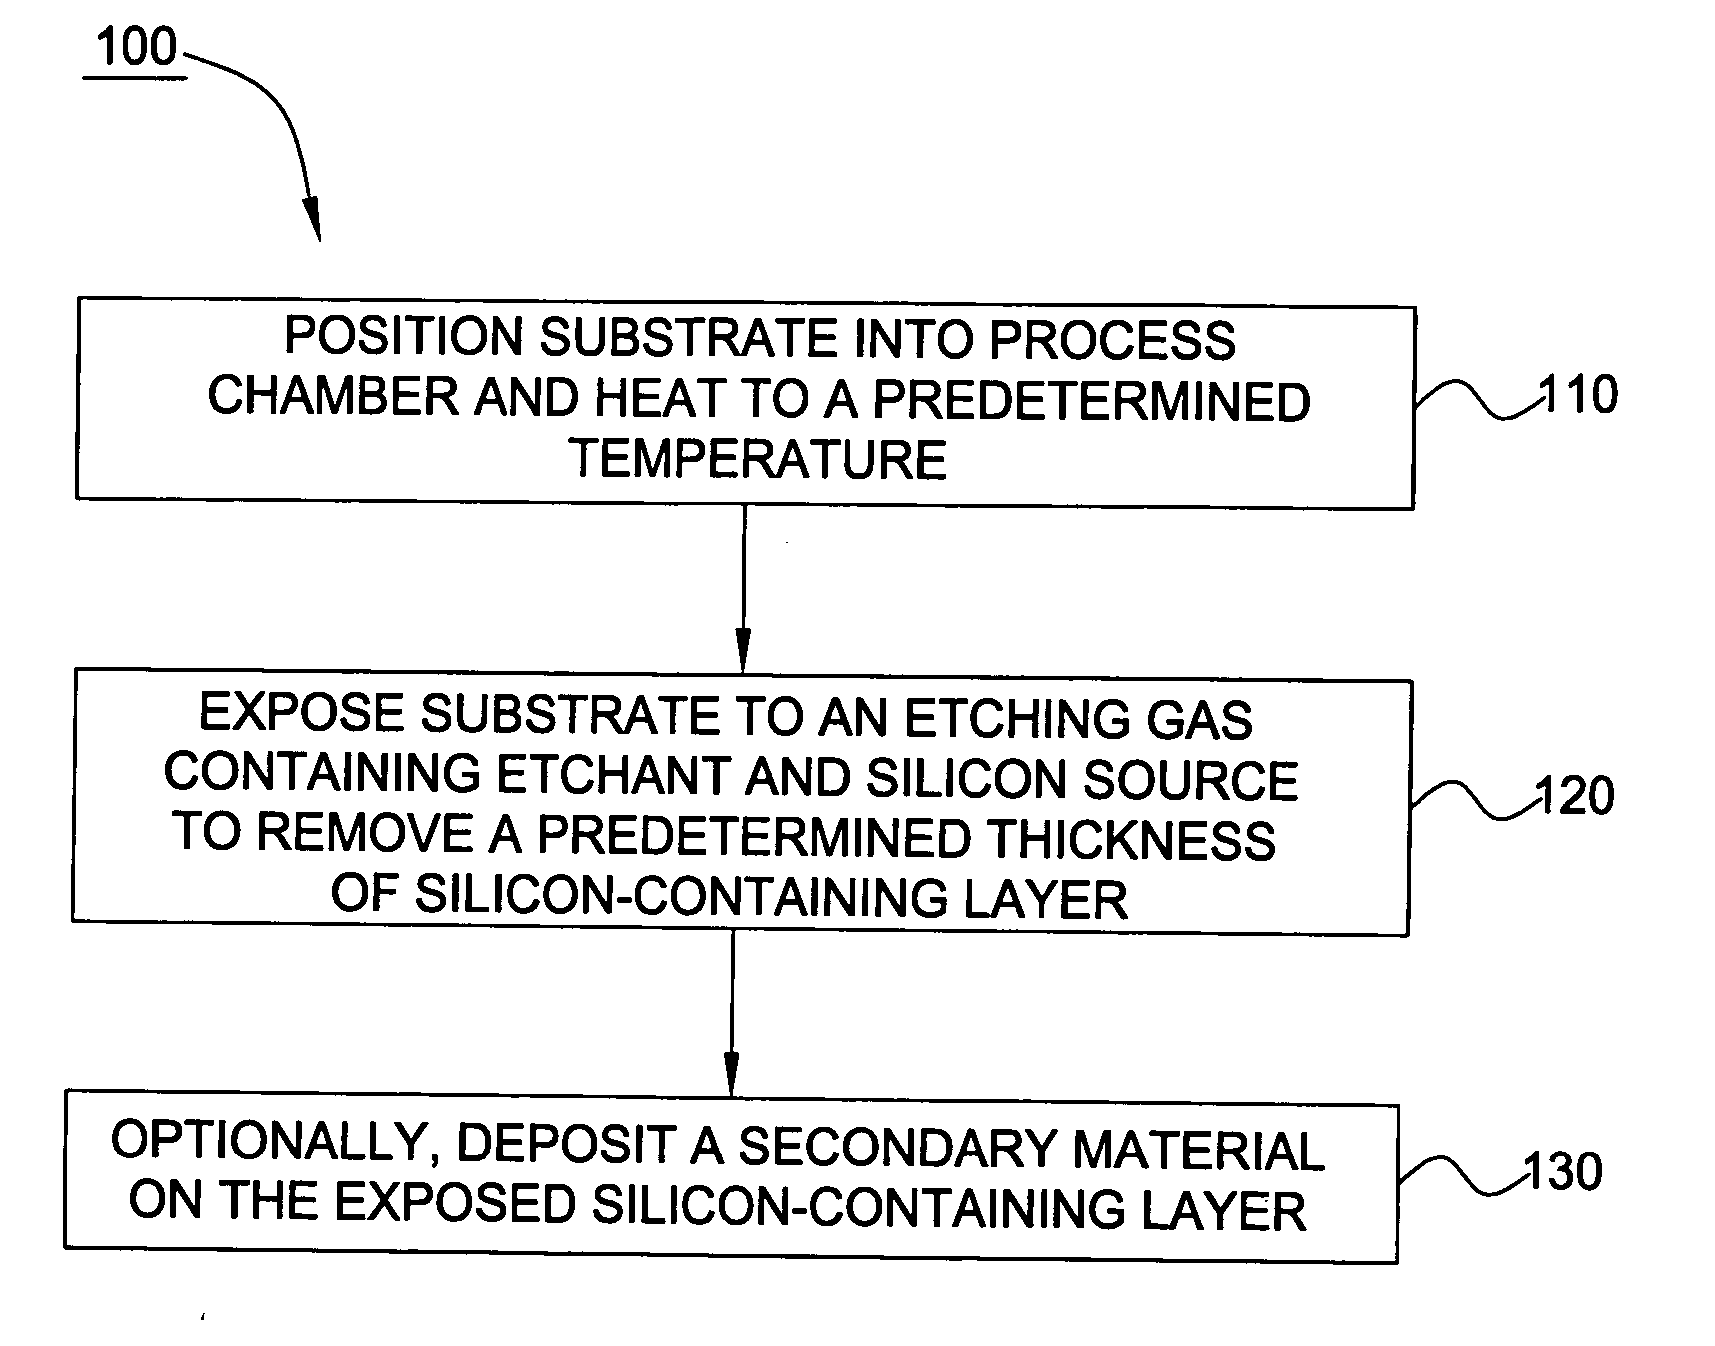 Low temperature etchant for treatment of silicon-containing surfaces